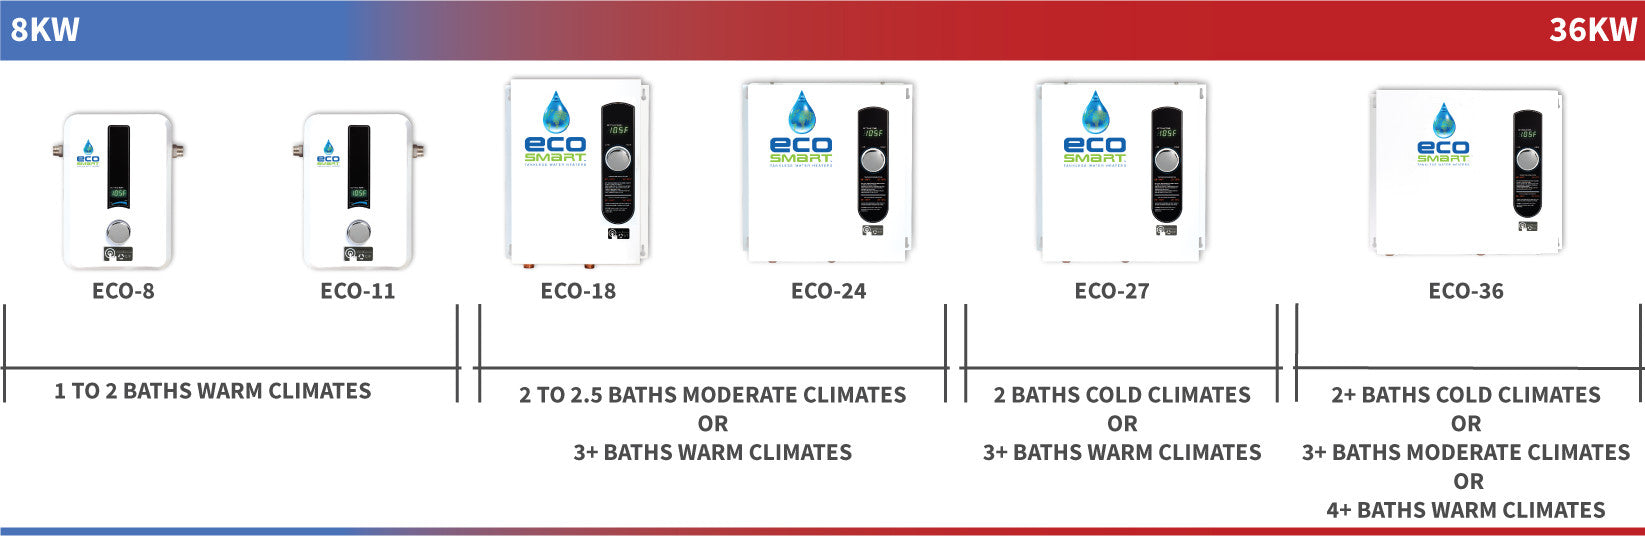 EcoSmart electric tankless water heater size guide displaying heaters from smallest to biggest